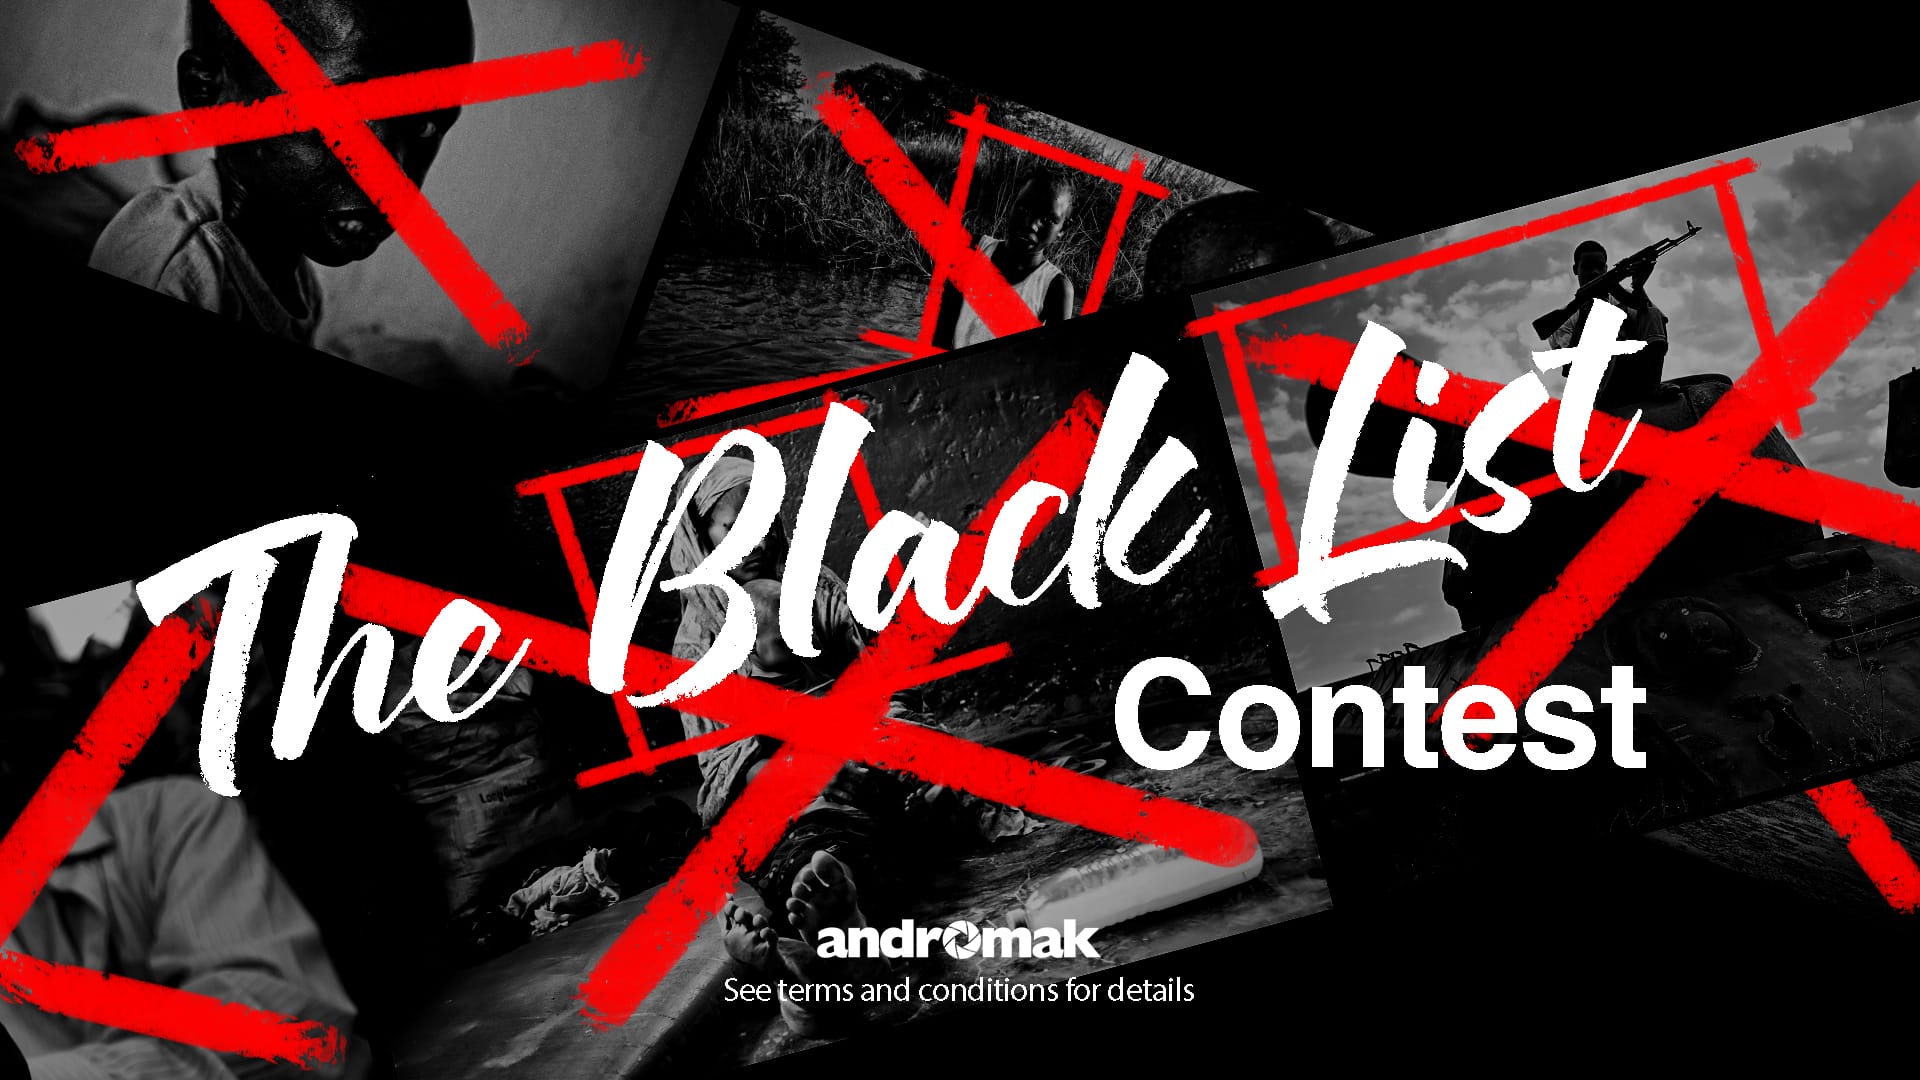 Black List Contest Terms & Conditions